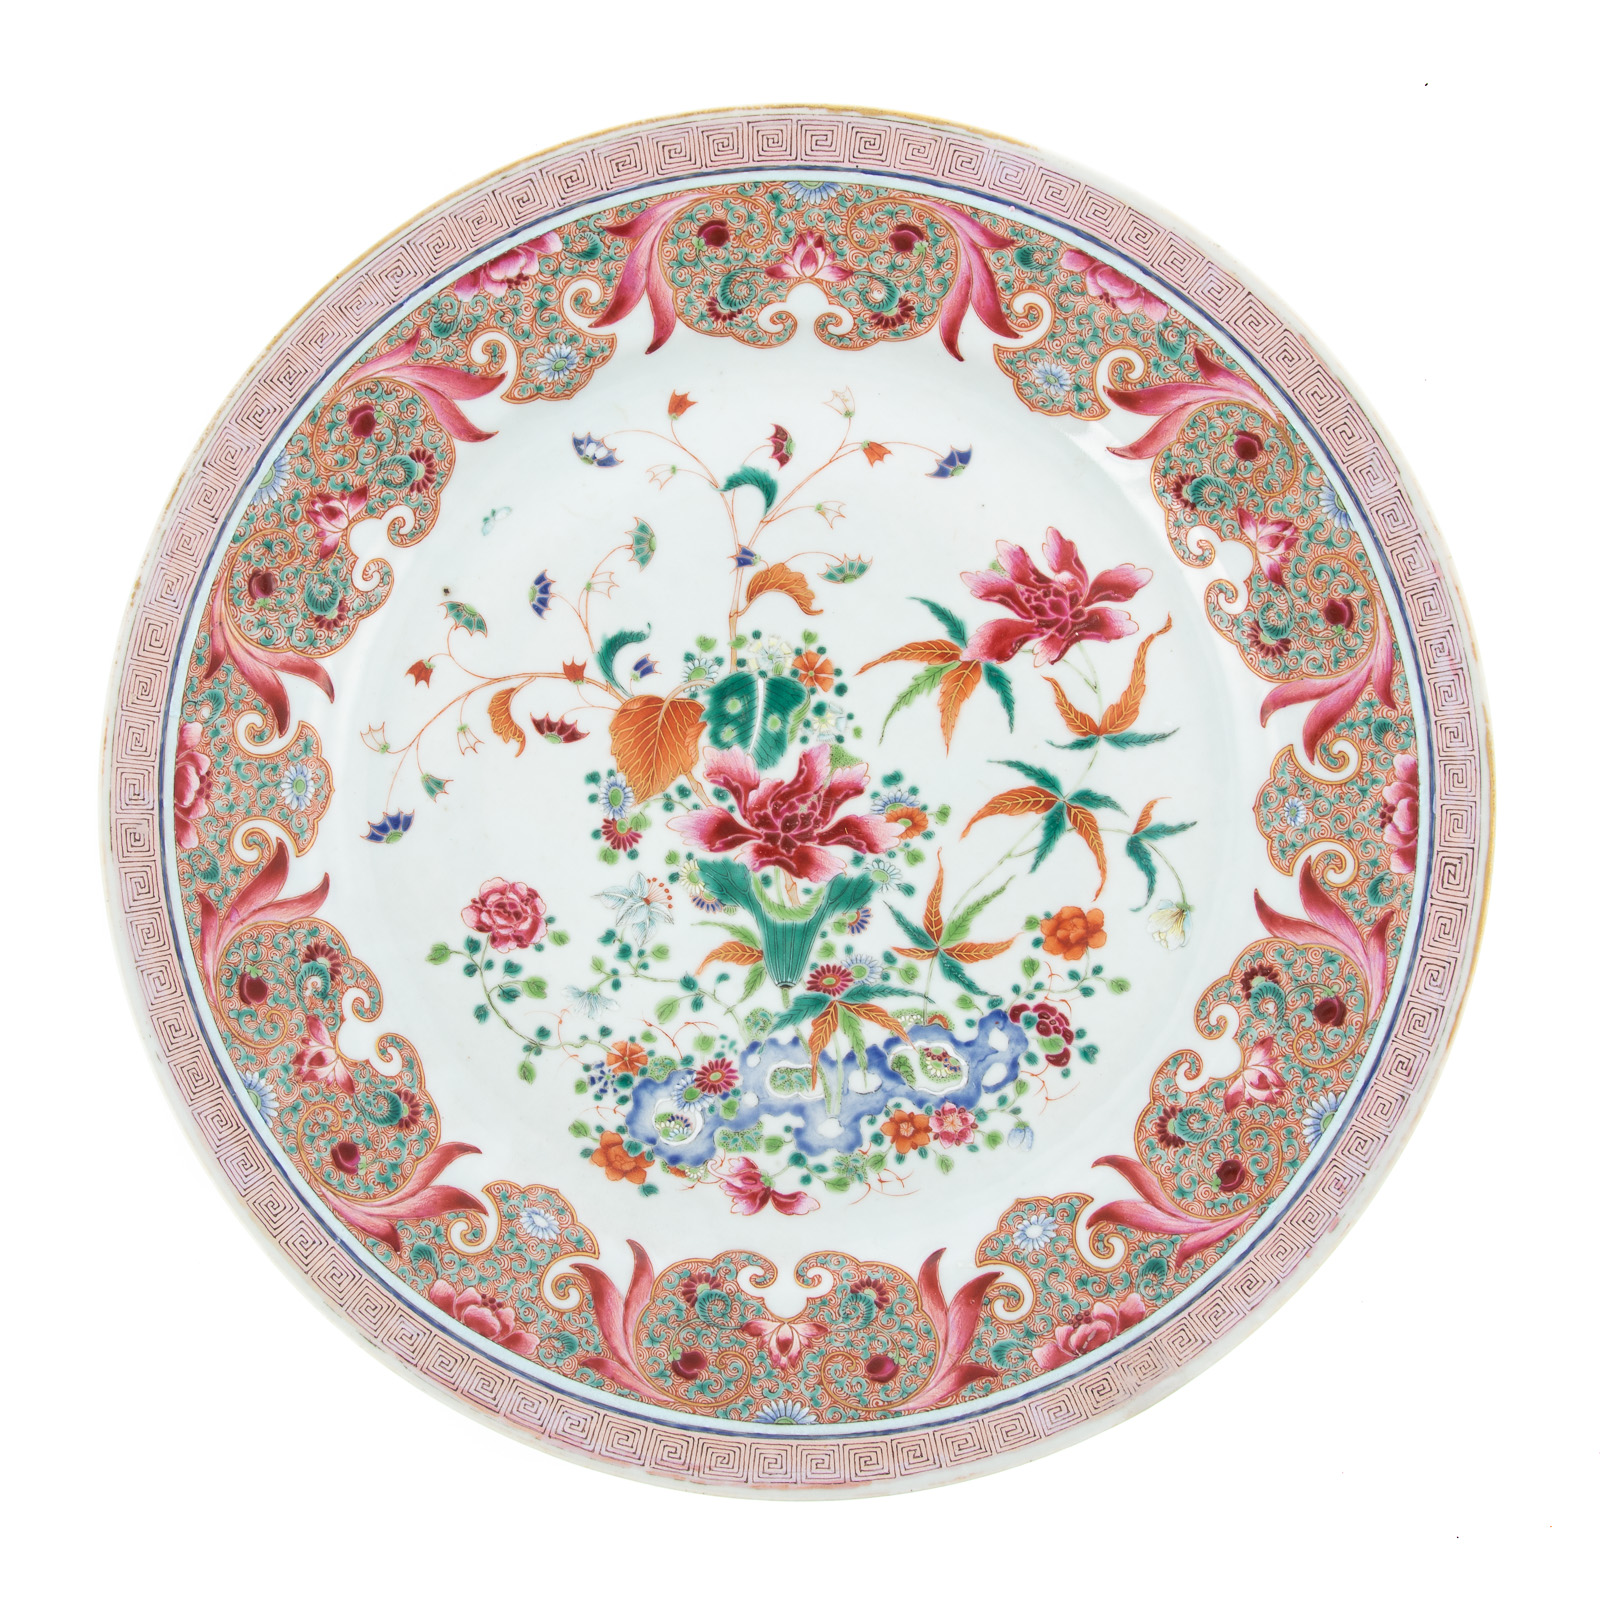 CHINESE EXPORT FAMILLE ROSE CHARGER 28758c